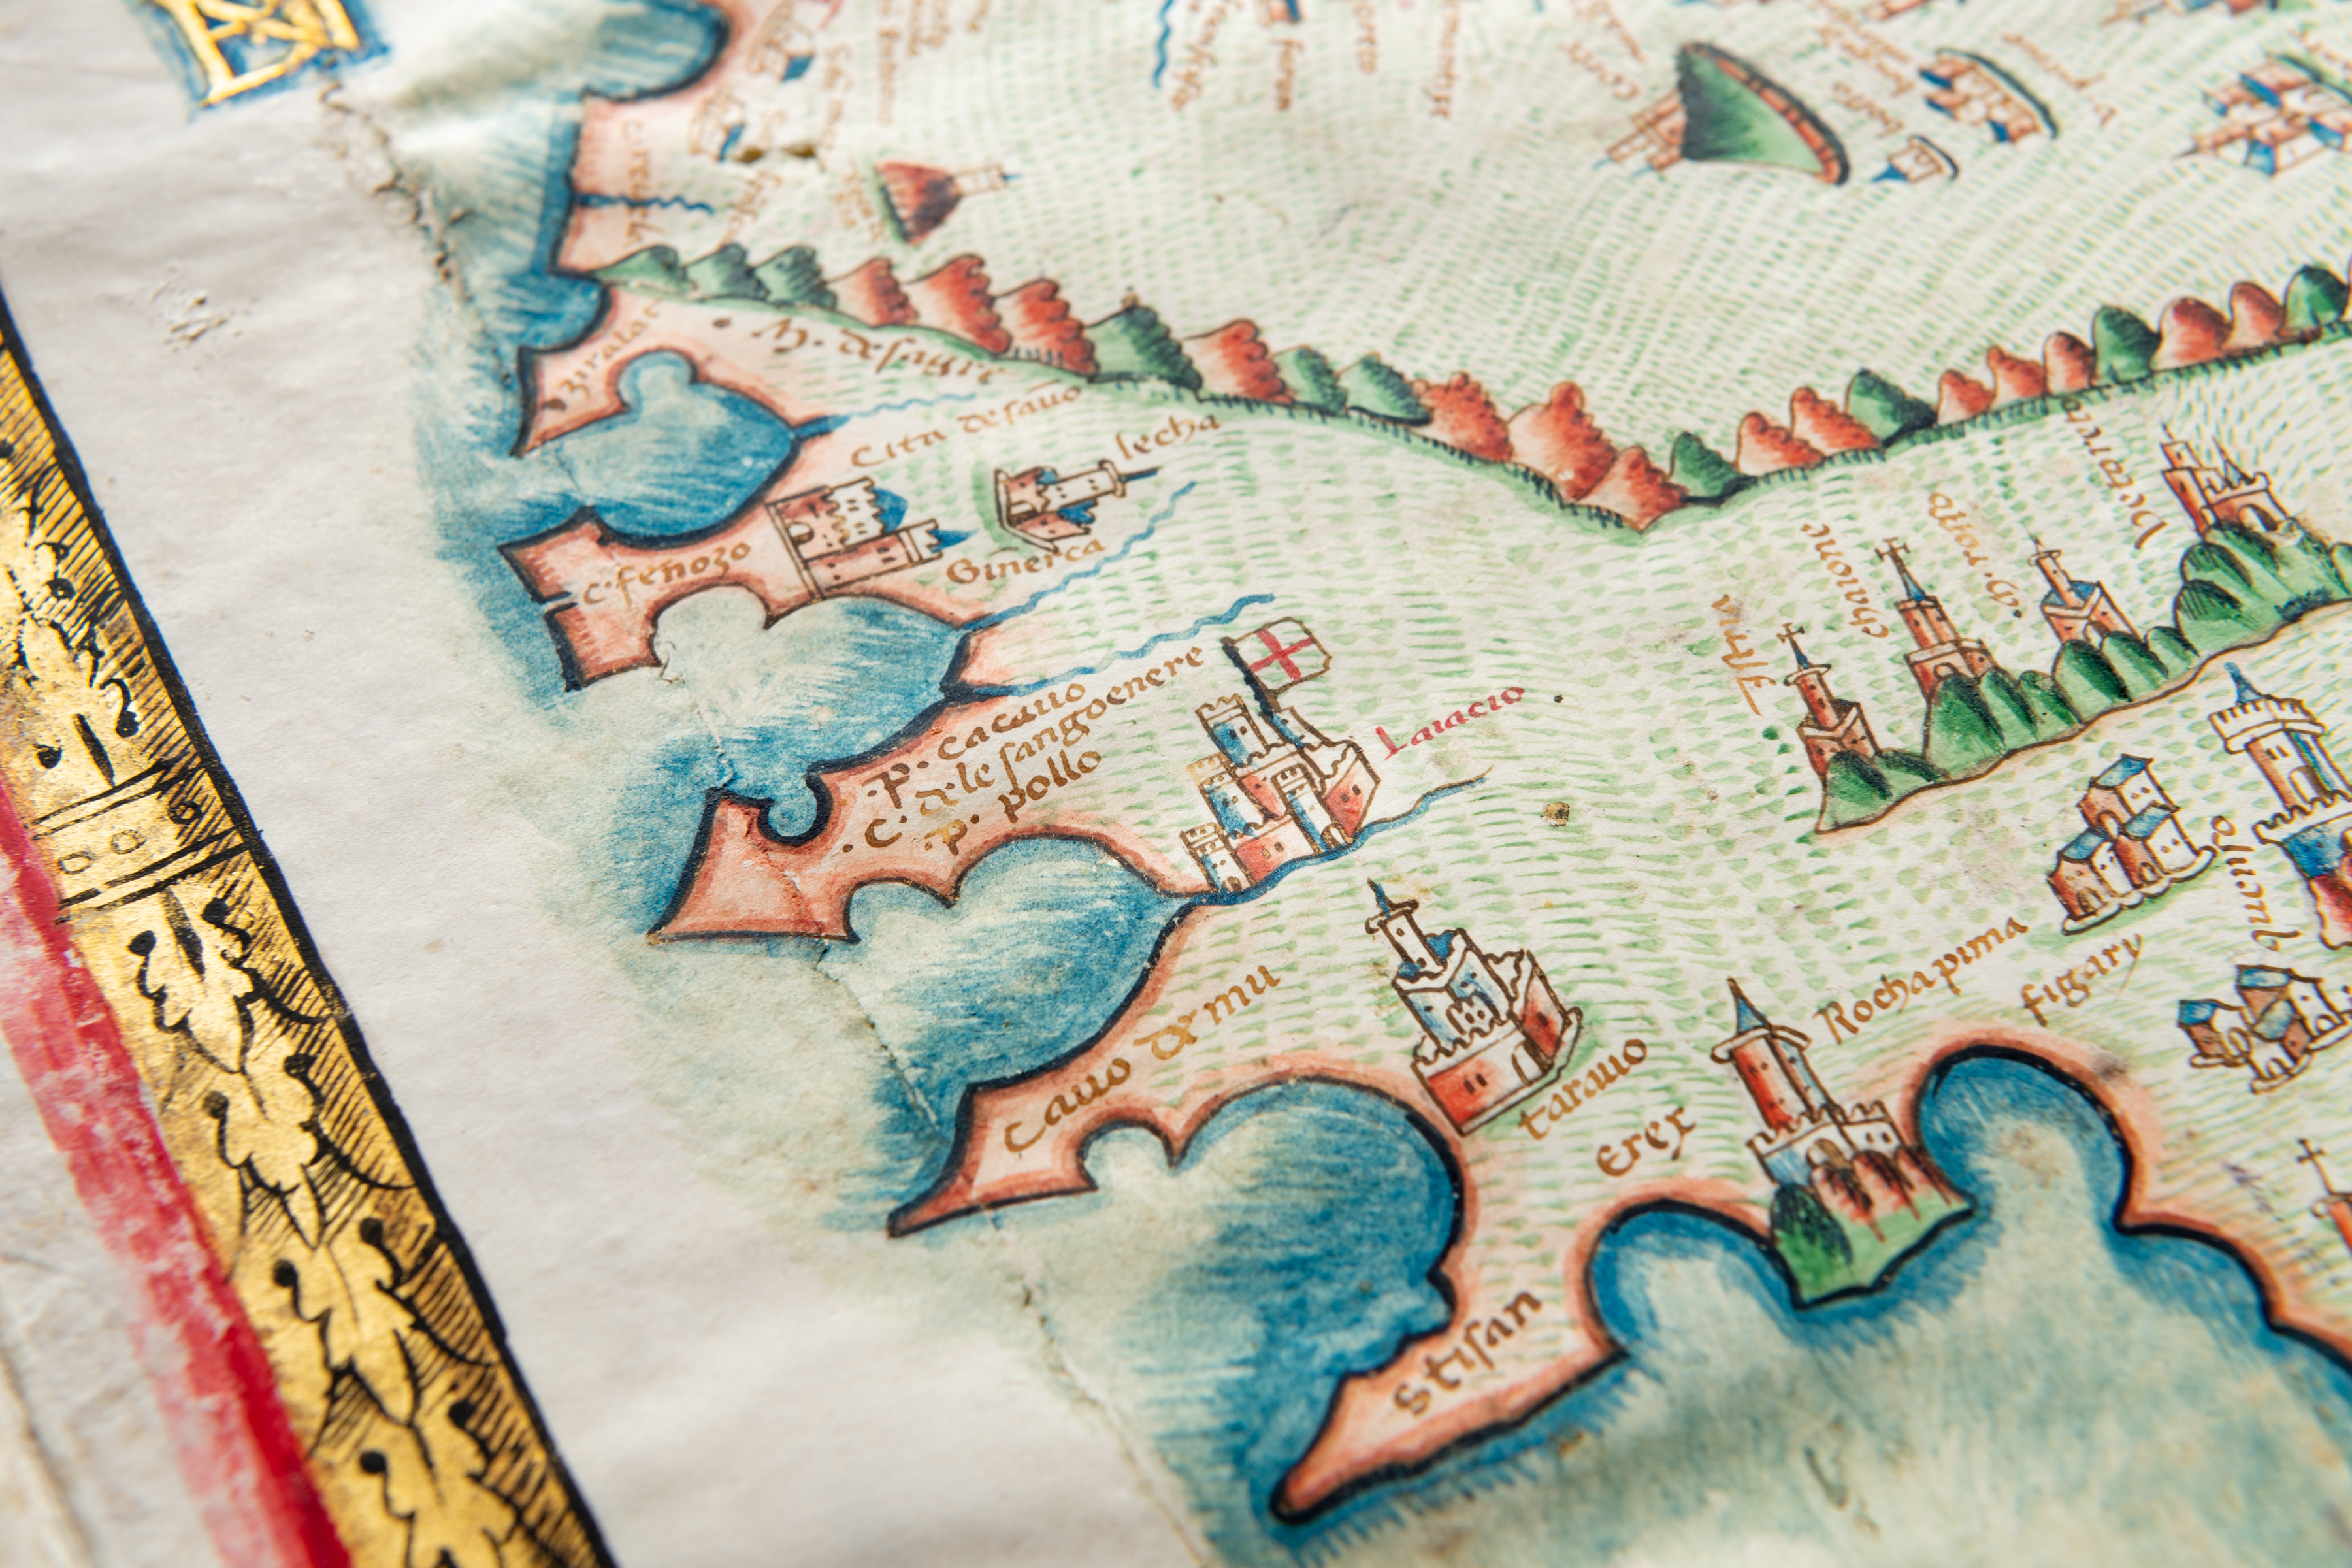 Detail of a colored manuscript atlas shows a coastal region and labels in Latin. Other details include drawings of castles and mountains.